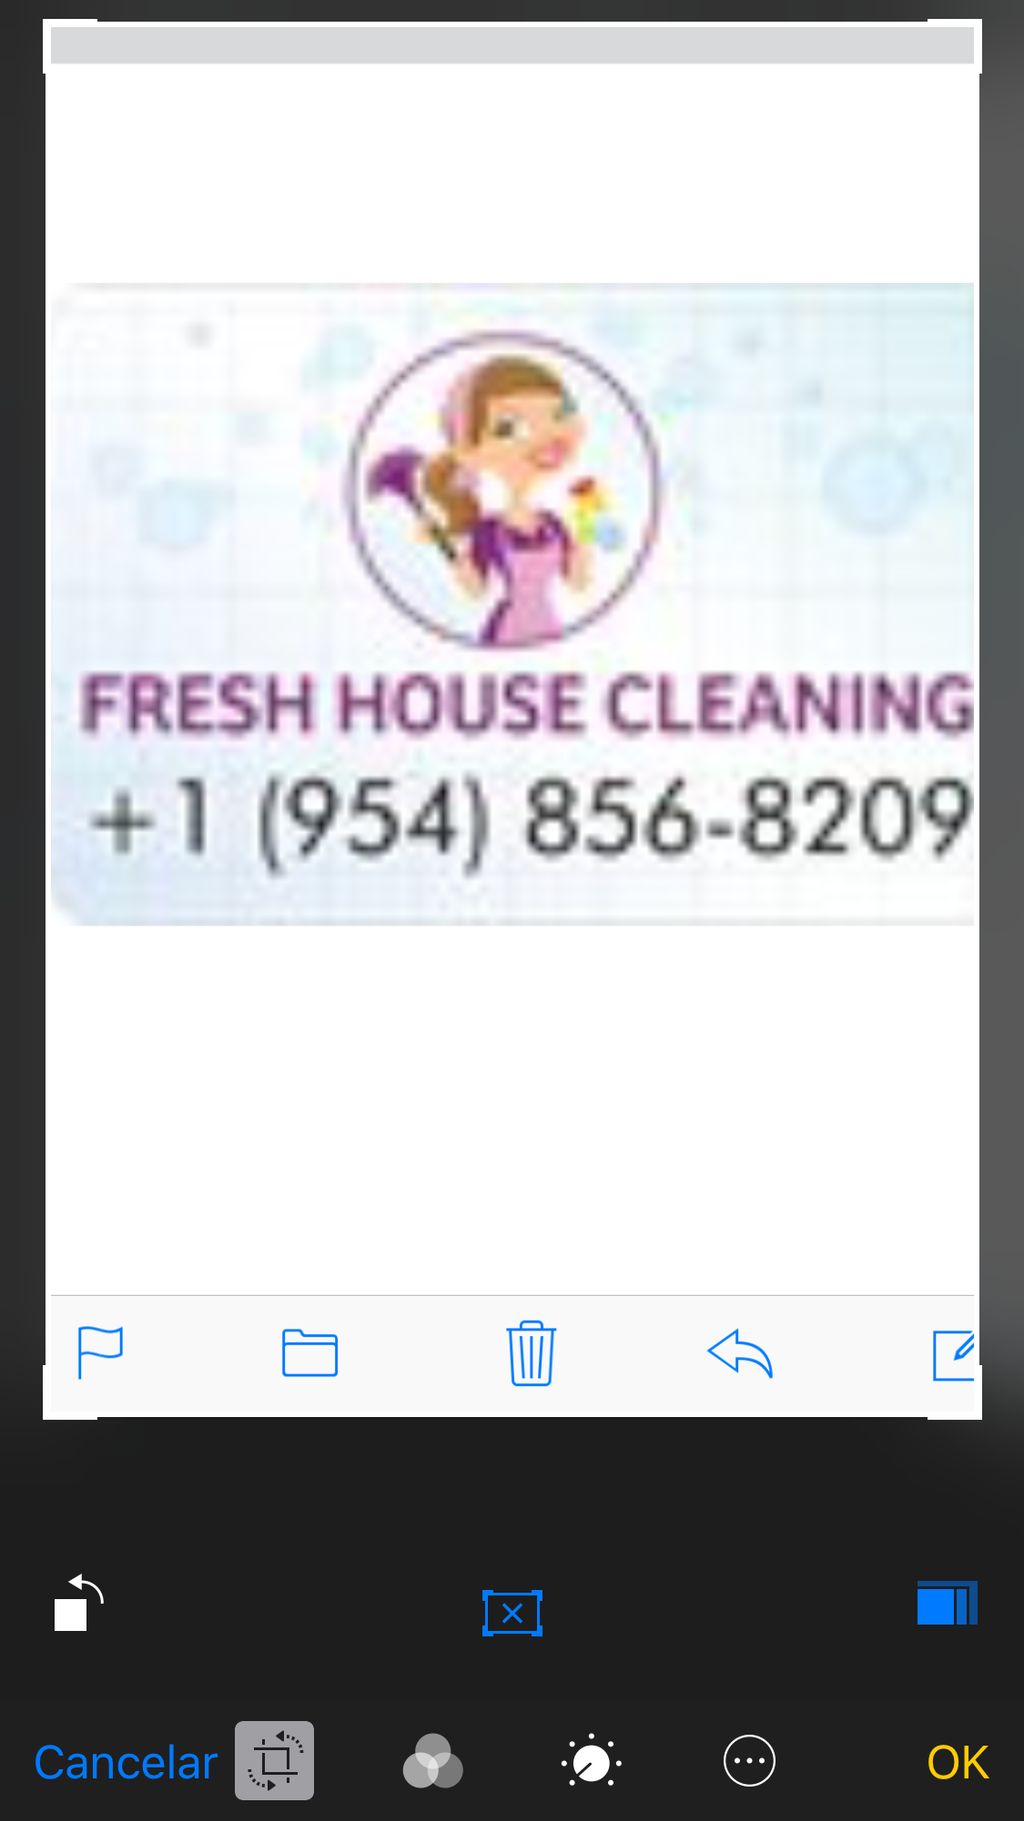 Fresh house cleaning